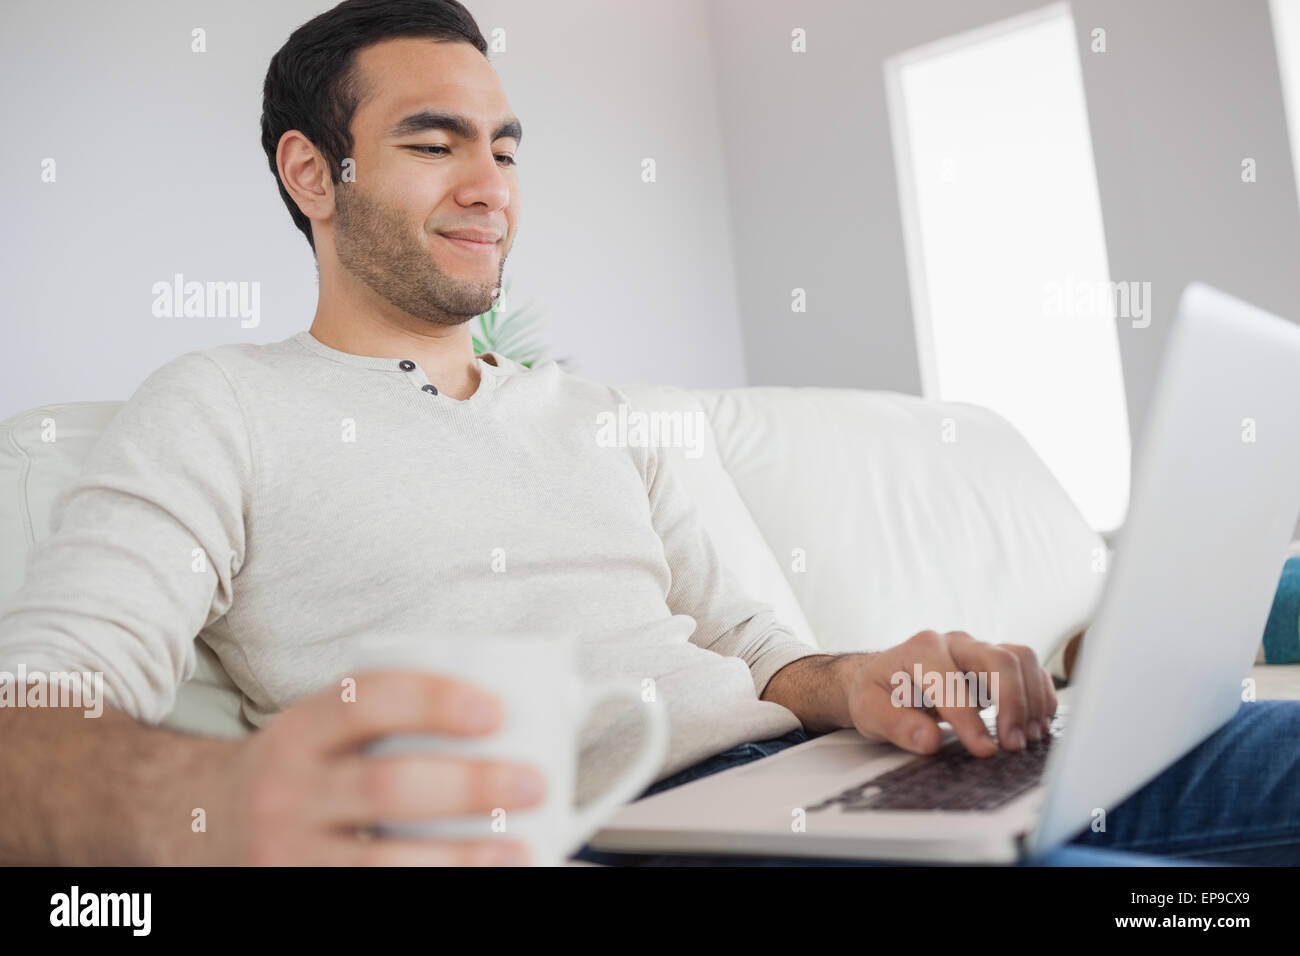 Peaceful handsome man having coffee while using his laptop Stock Photo